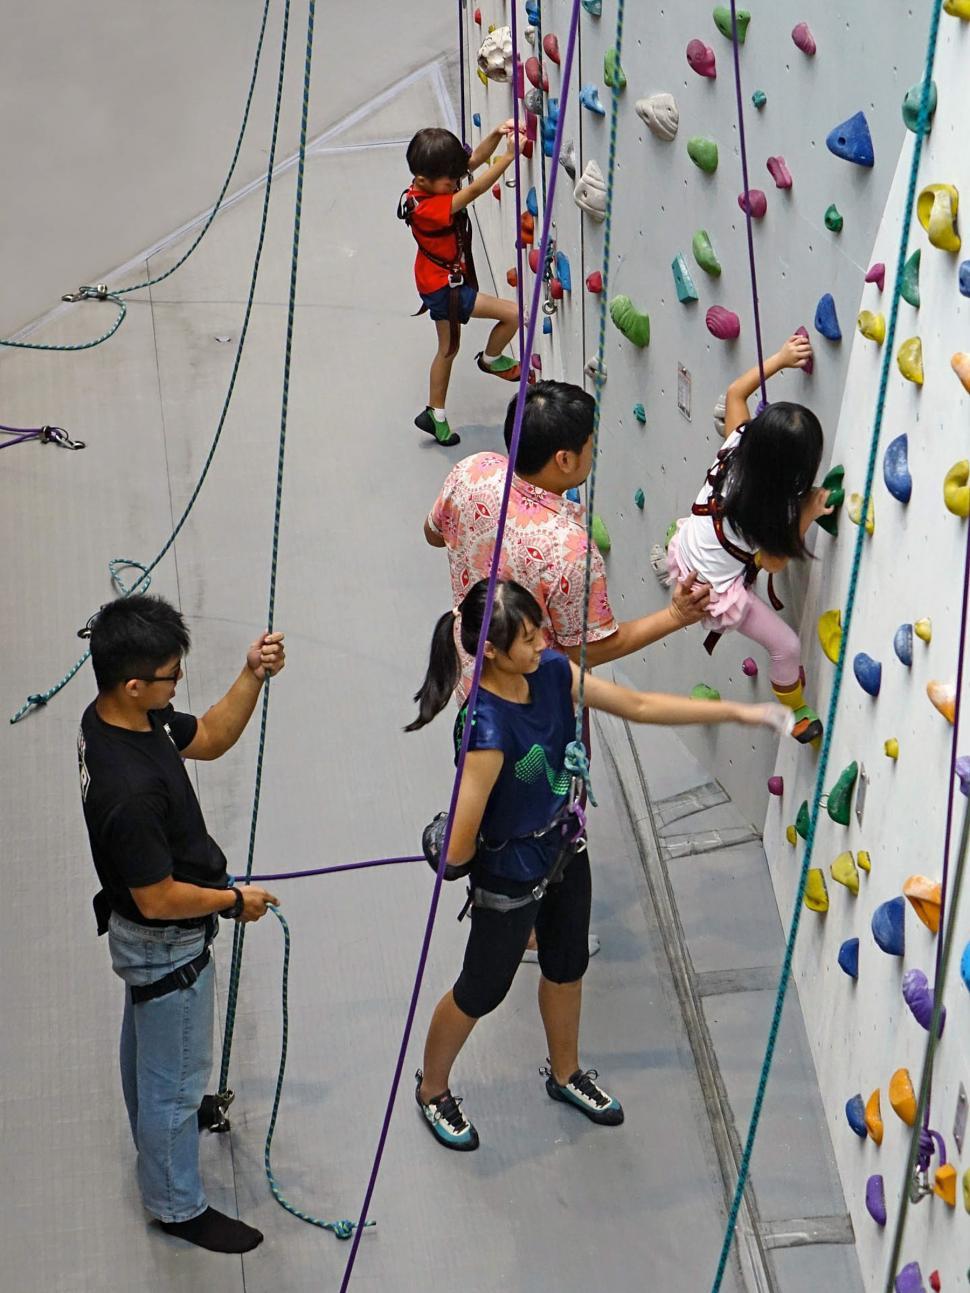 Free Image of Group of People Climbing Up Wall 